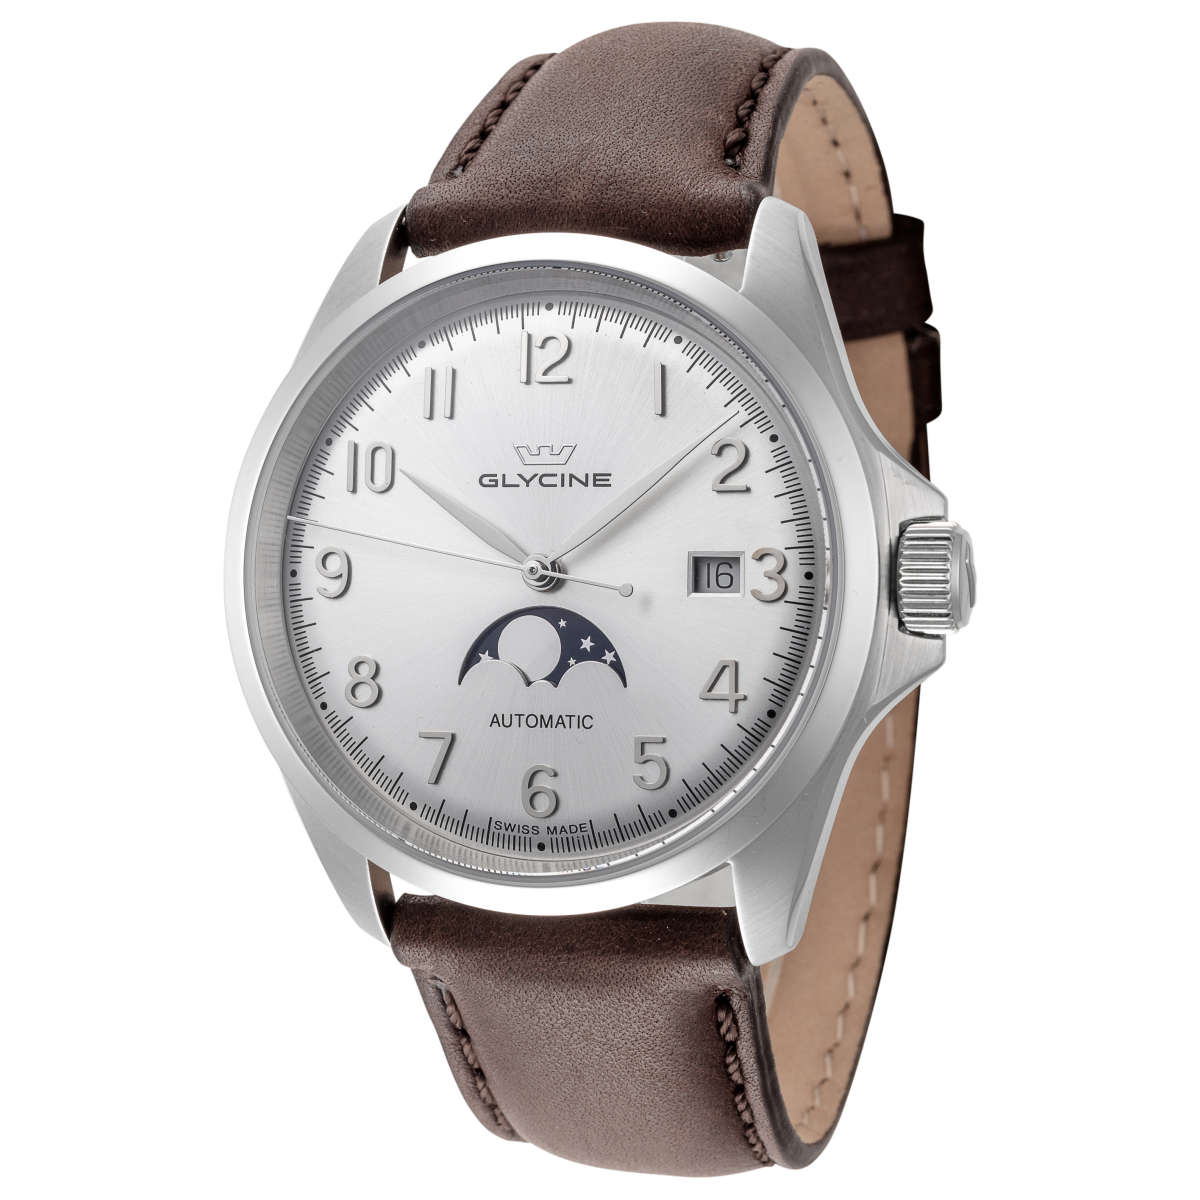 Glycine Men's Combat Classic 40 Moonphase Watch $289 + Free Shipping